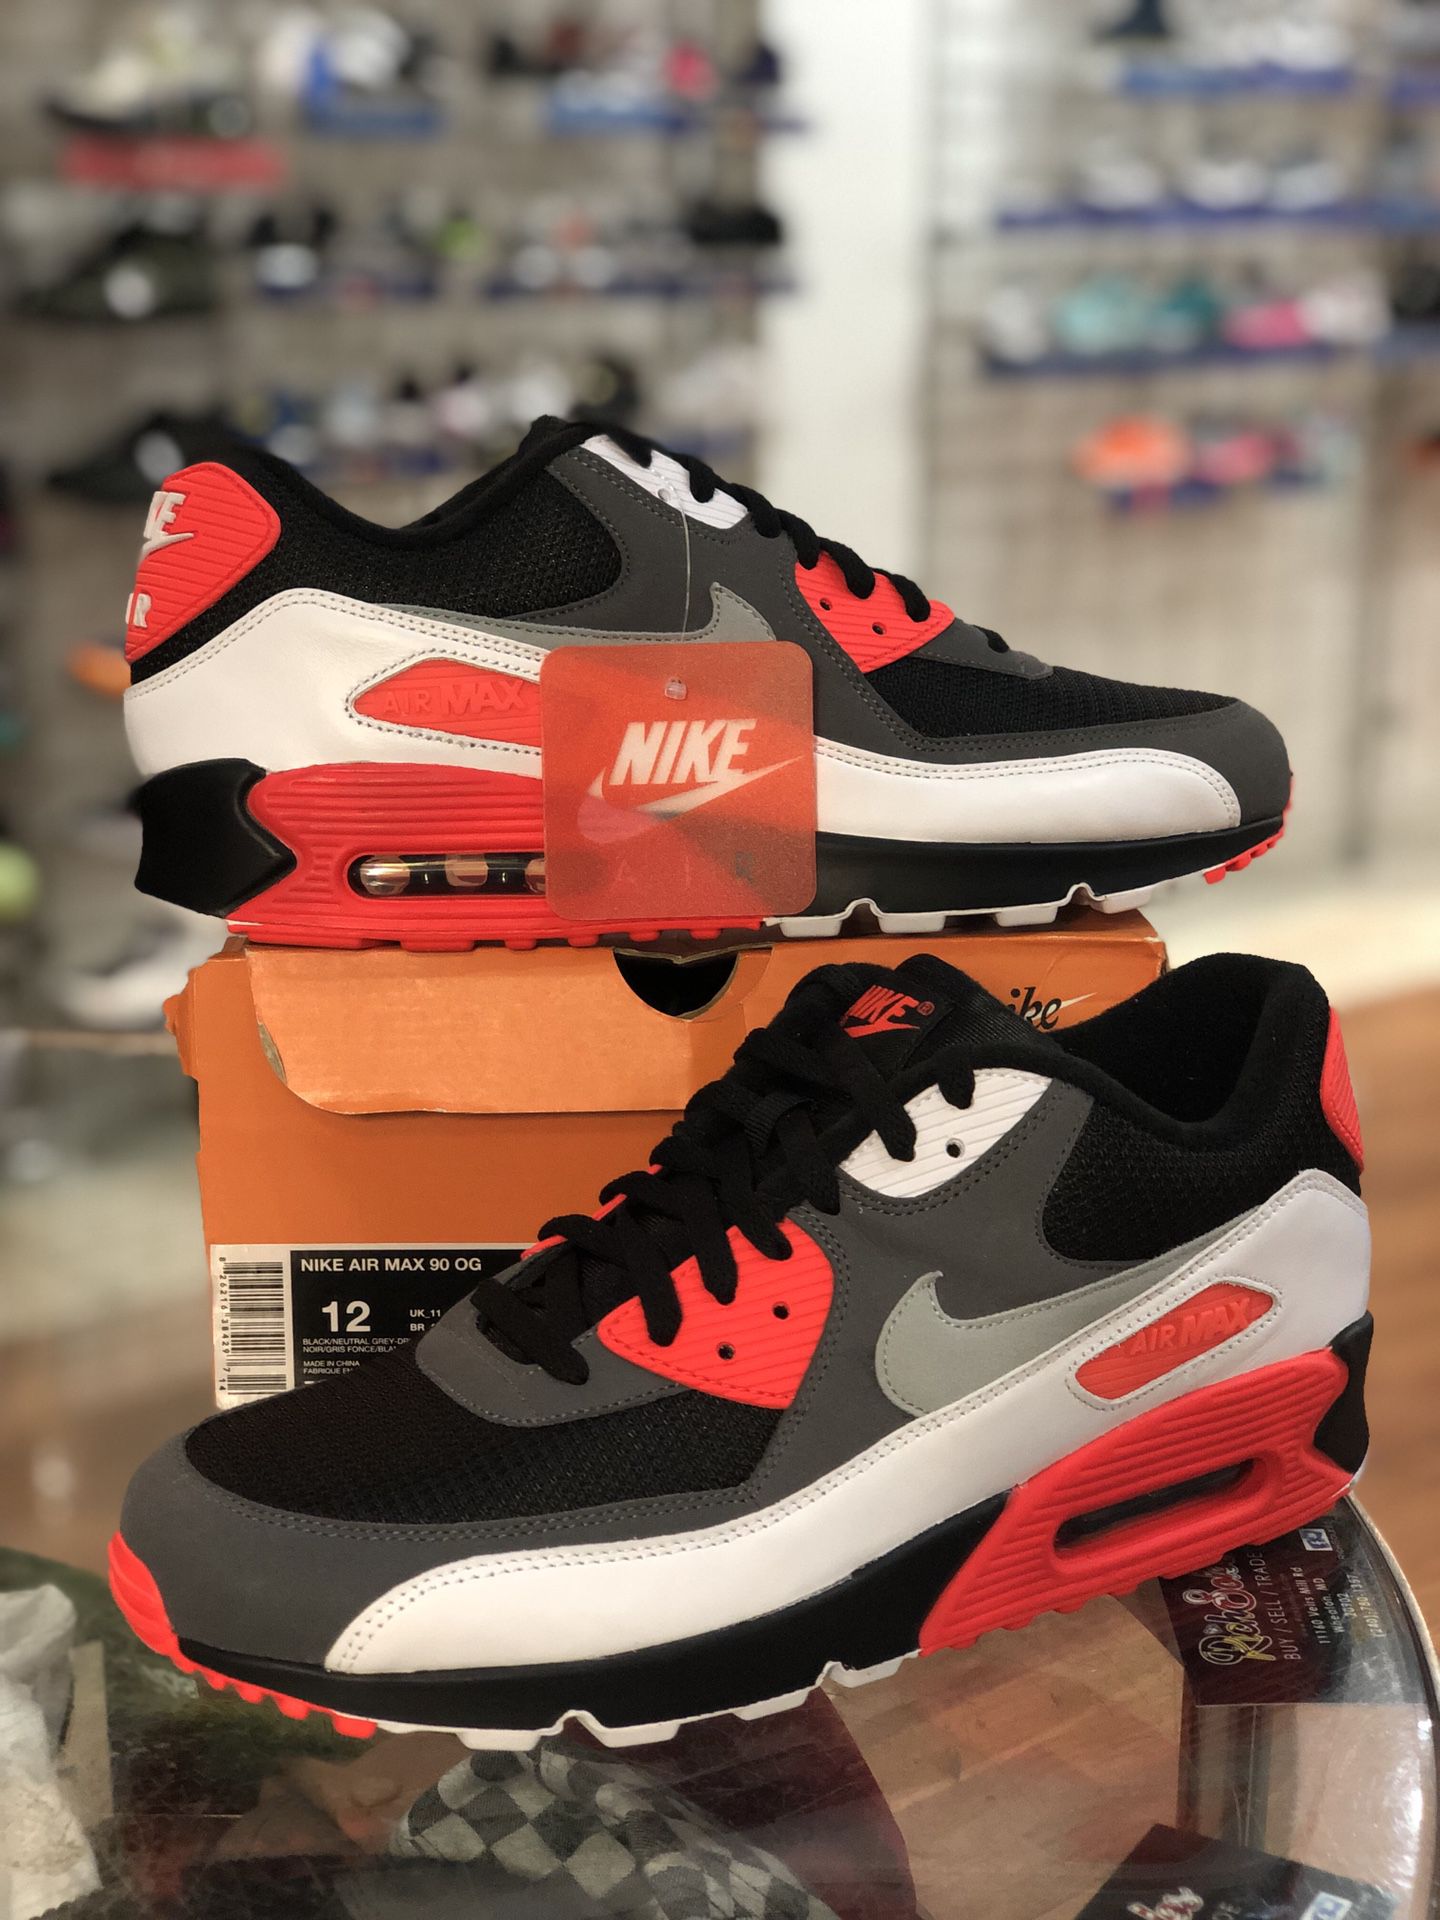 Reverse Infrared Air Max 90s size 12